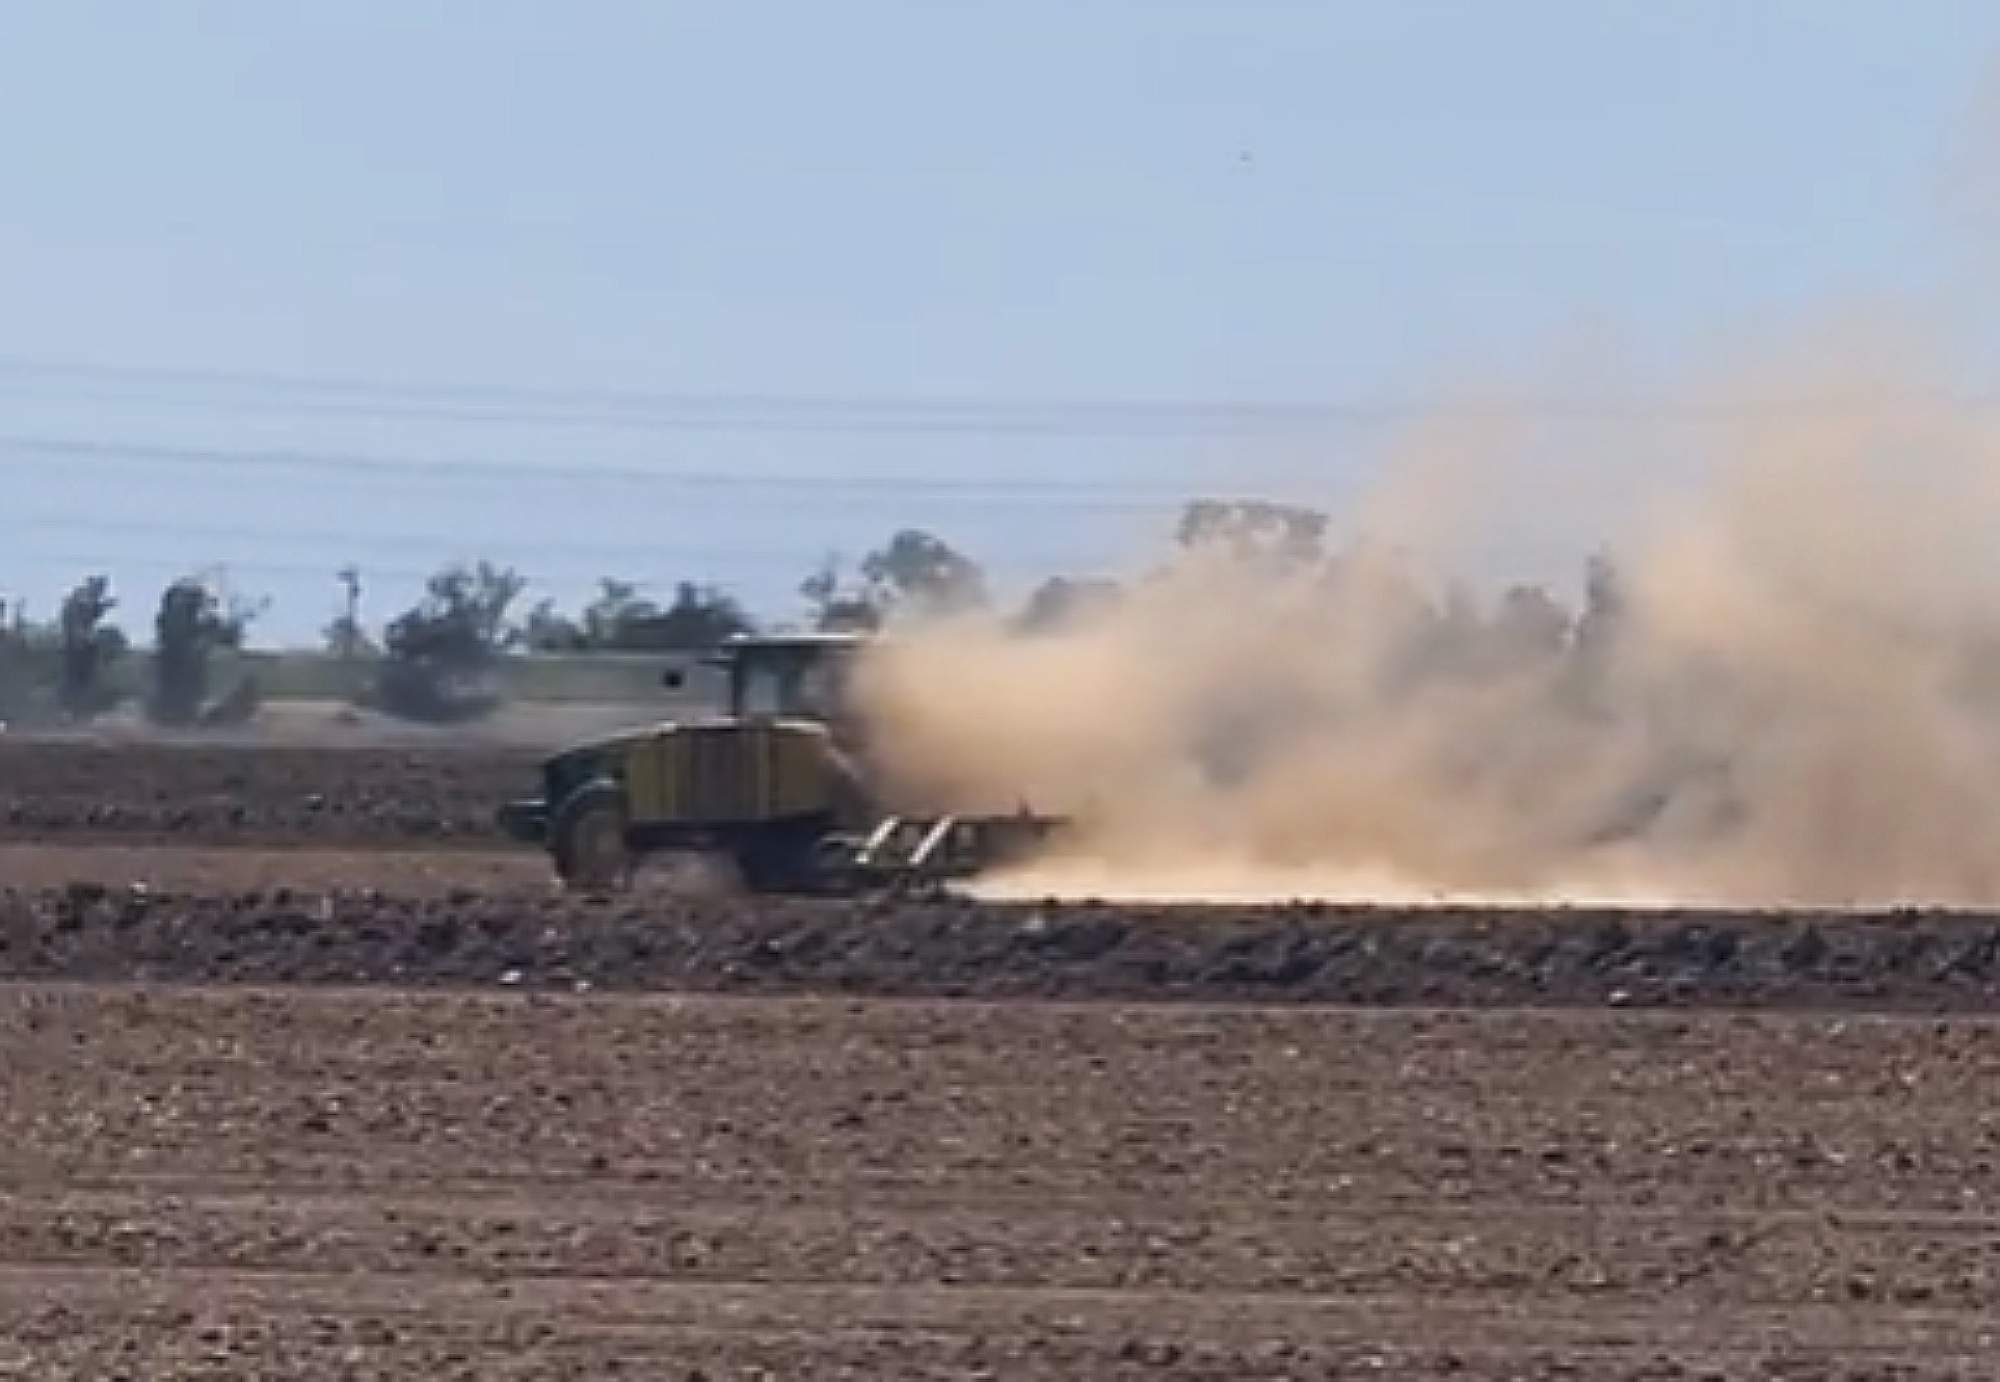 Pictured: A tractor plows through a field of dirt in the daytime of Sutter County. The sky is blue but the large cloud of dust that follows the tractor pollutes the air.